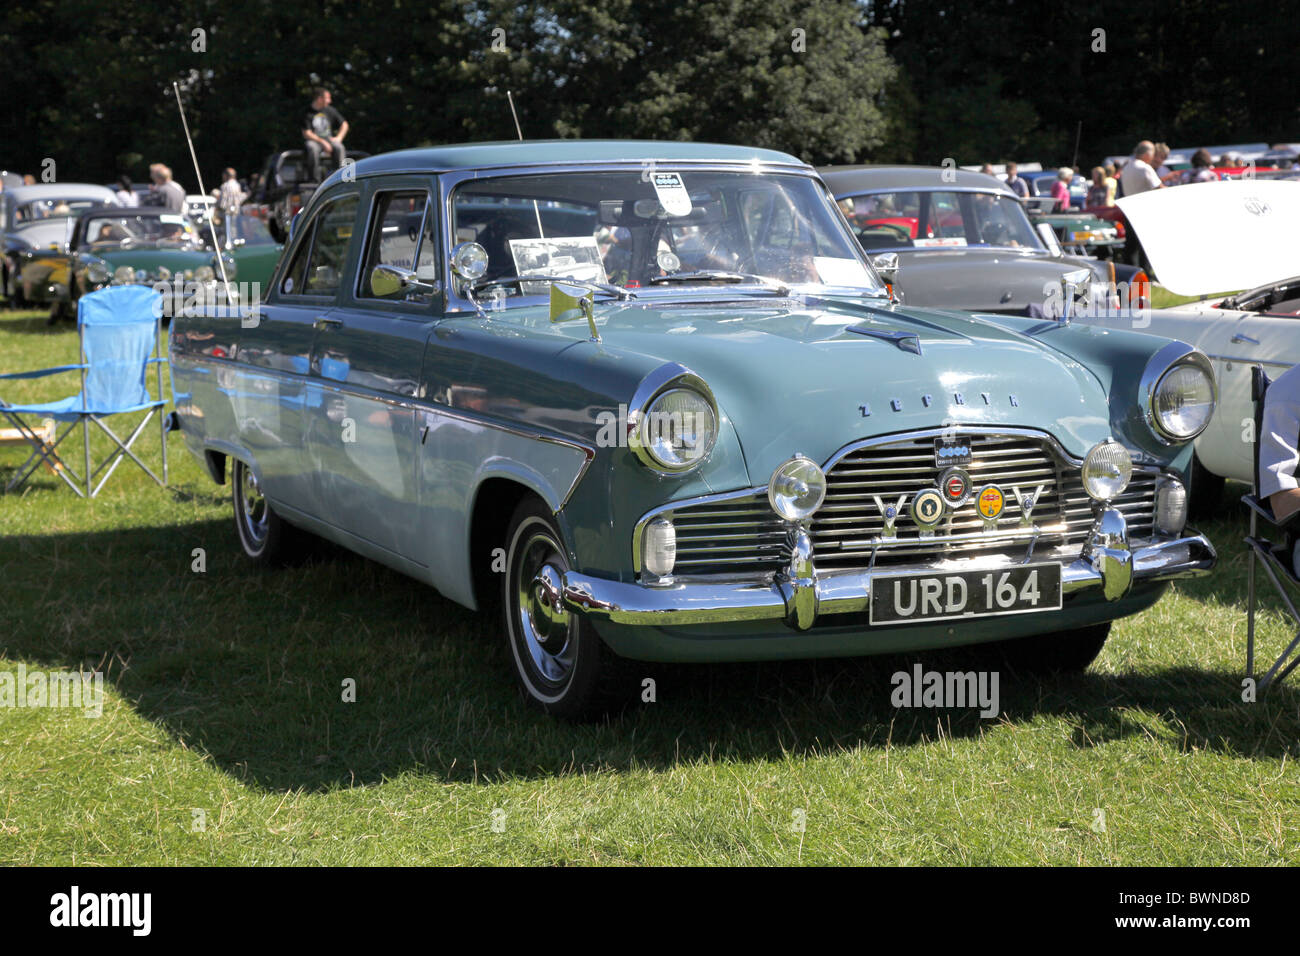 BLUE FORD ZEPHYR MK II STAINDROP NORTH YORKSHIRE RABY CASTLE STAINDROP NORTH YORKSHIRE STAINDROP NORTH YORKSHIRE 22 August 20 Stock Photo